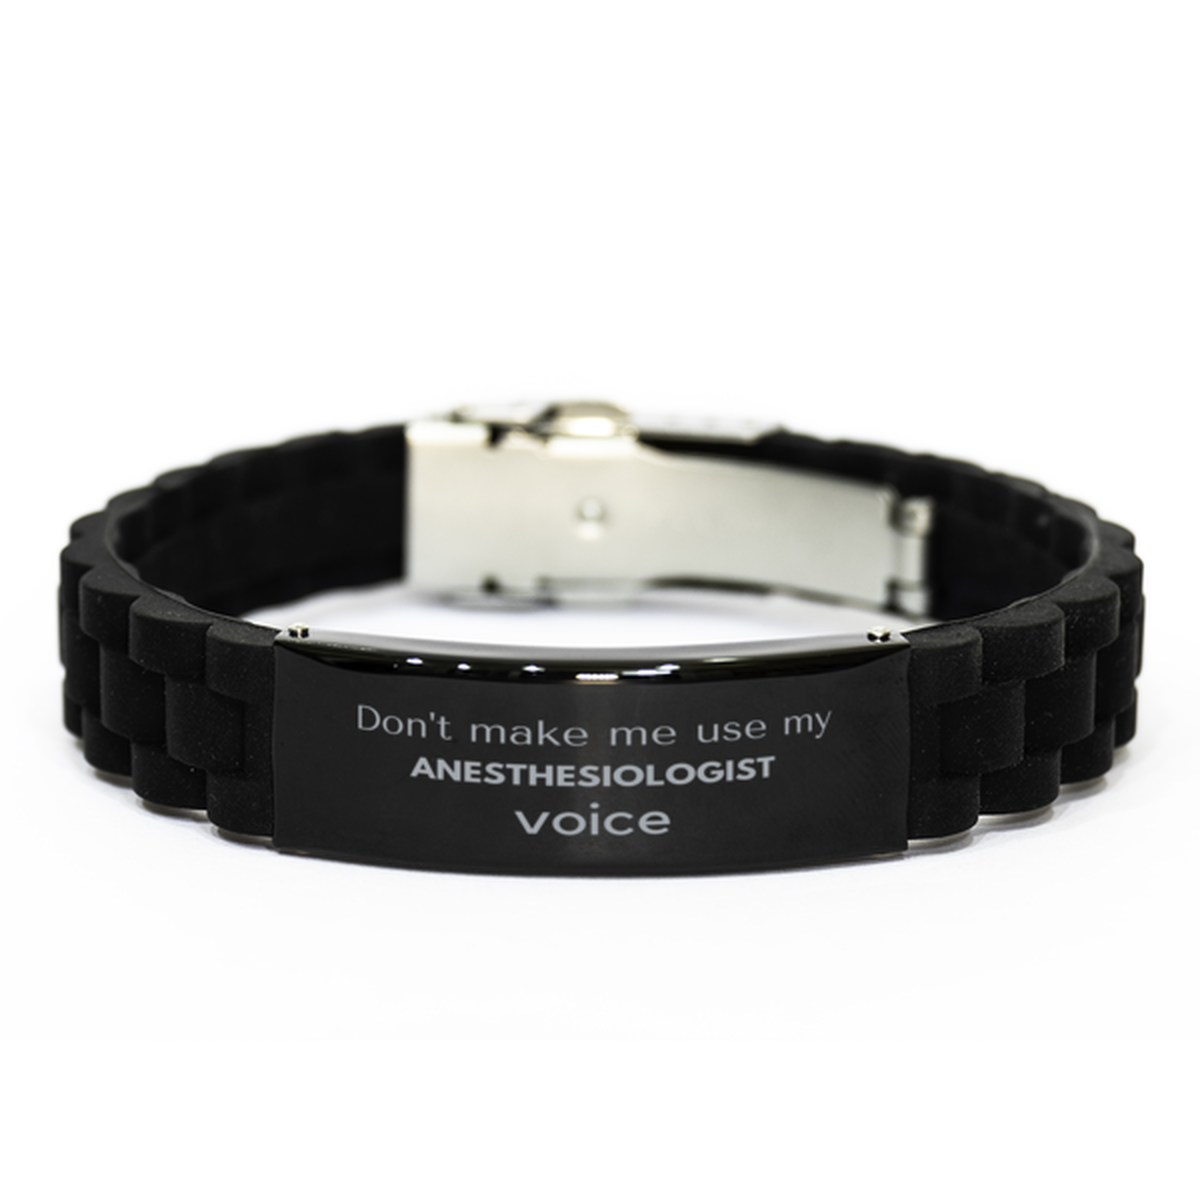 Don't make me use my Anesthesiologist voice, Sarcasm Anesthesiologist Gifts, Christmas Anesthesiologist Black Glidelock Clasp Bracelet Birthday Unique Gifts For Anesthesiologist Coworkers, Men, Women, Colleague, Friends